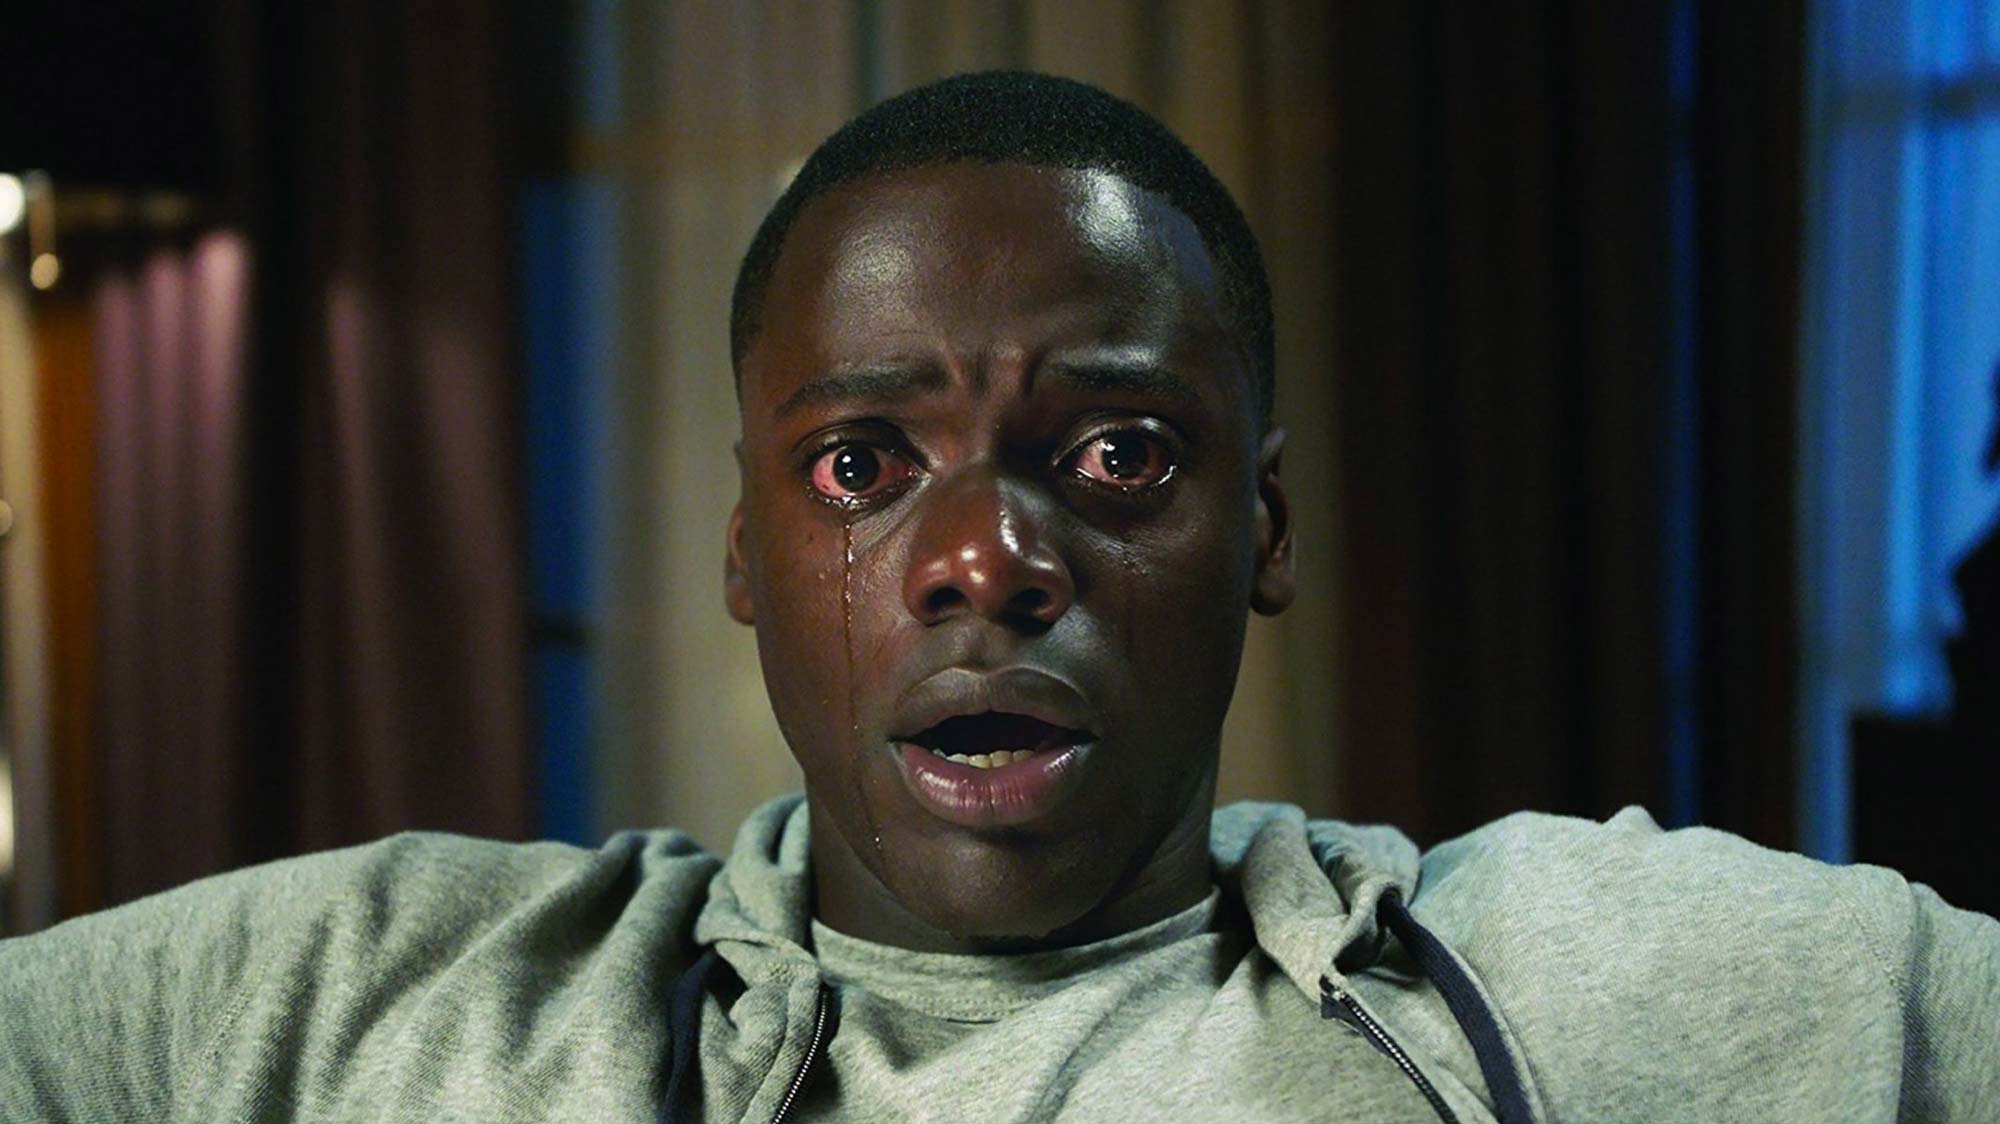 Best Black movies: Get Out